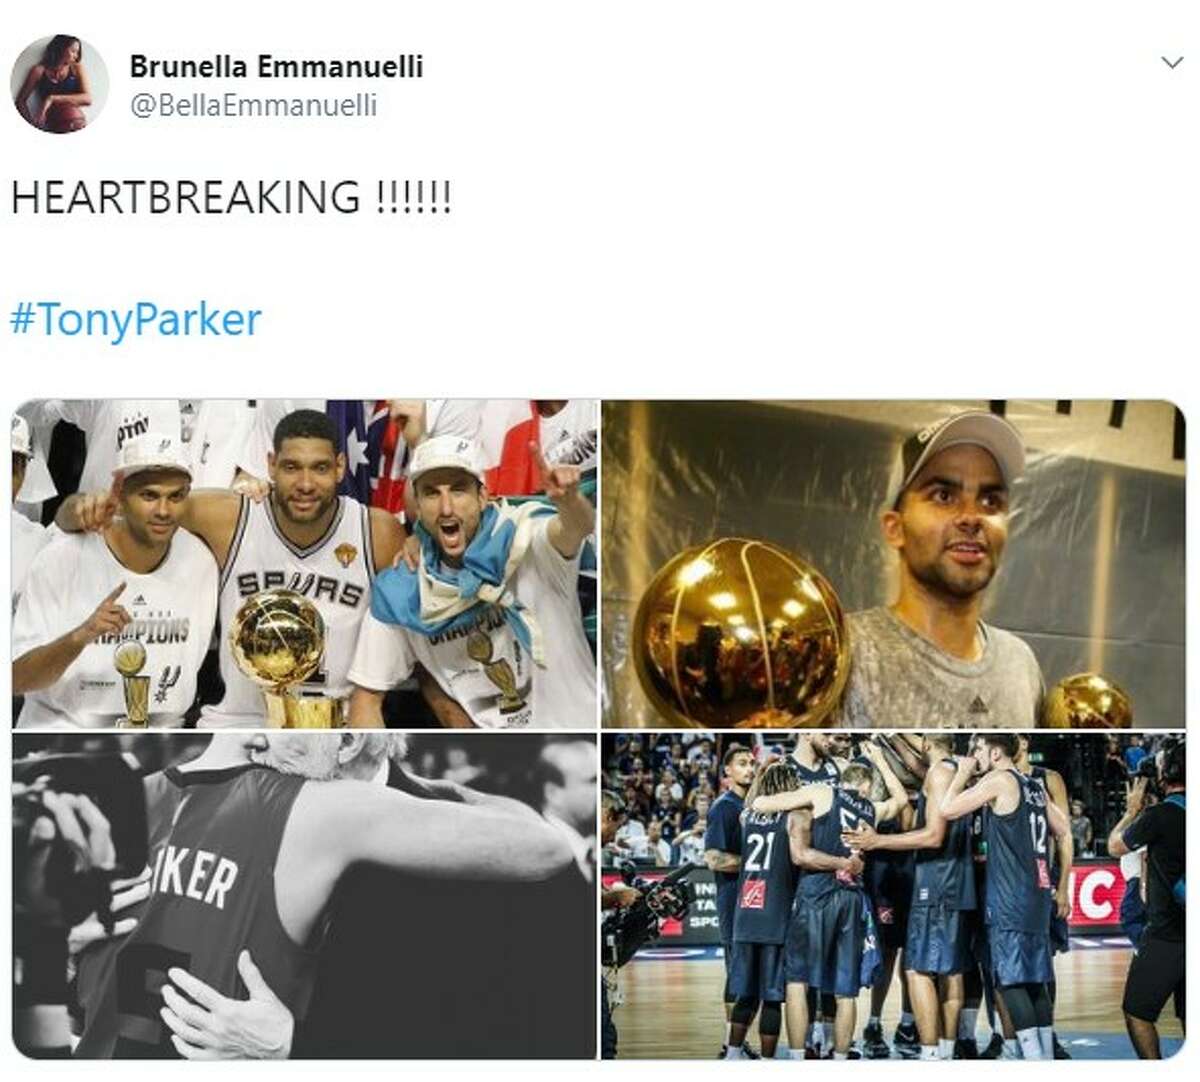 San Antonio Spurs fans react on Twitter to the news of former Spur Tony Parker's announcement that he will retire from basketball.